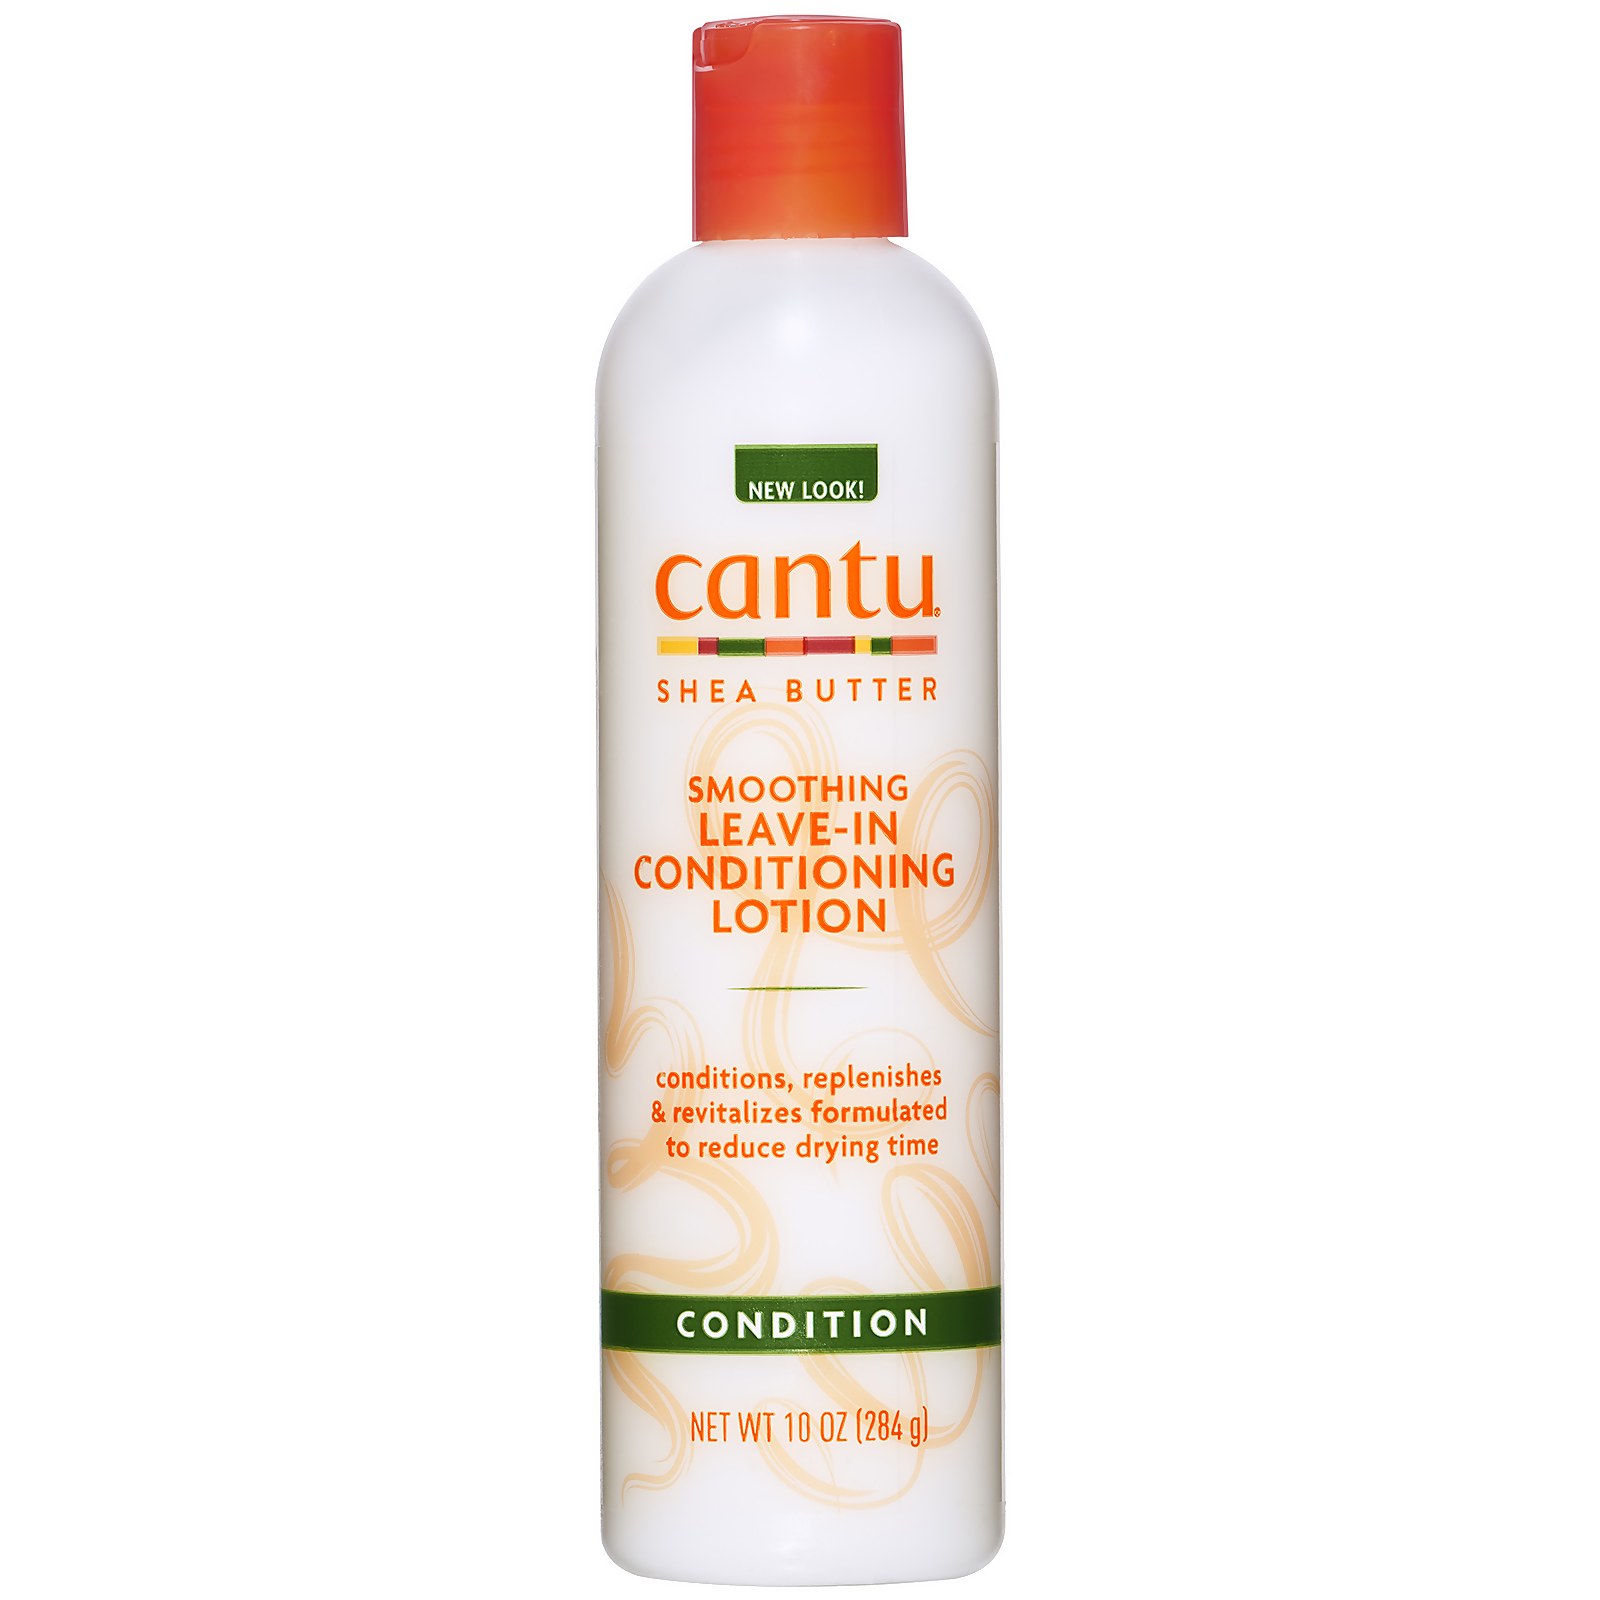 Image of Cantu Shea Butter Smoothing Leave-In Conditioning Lotion